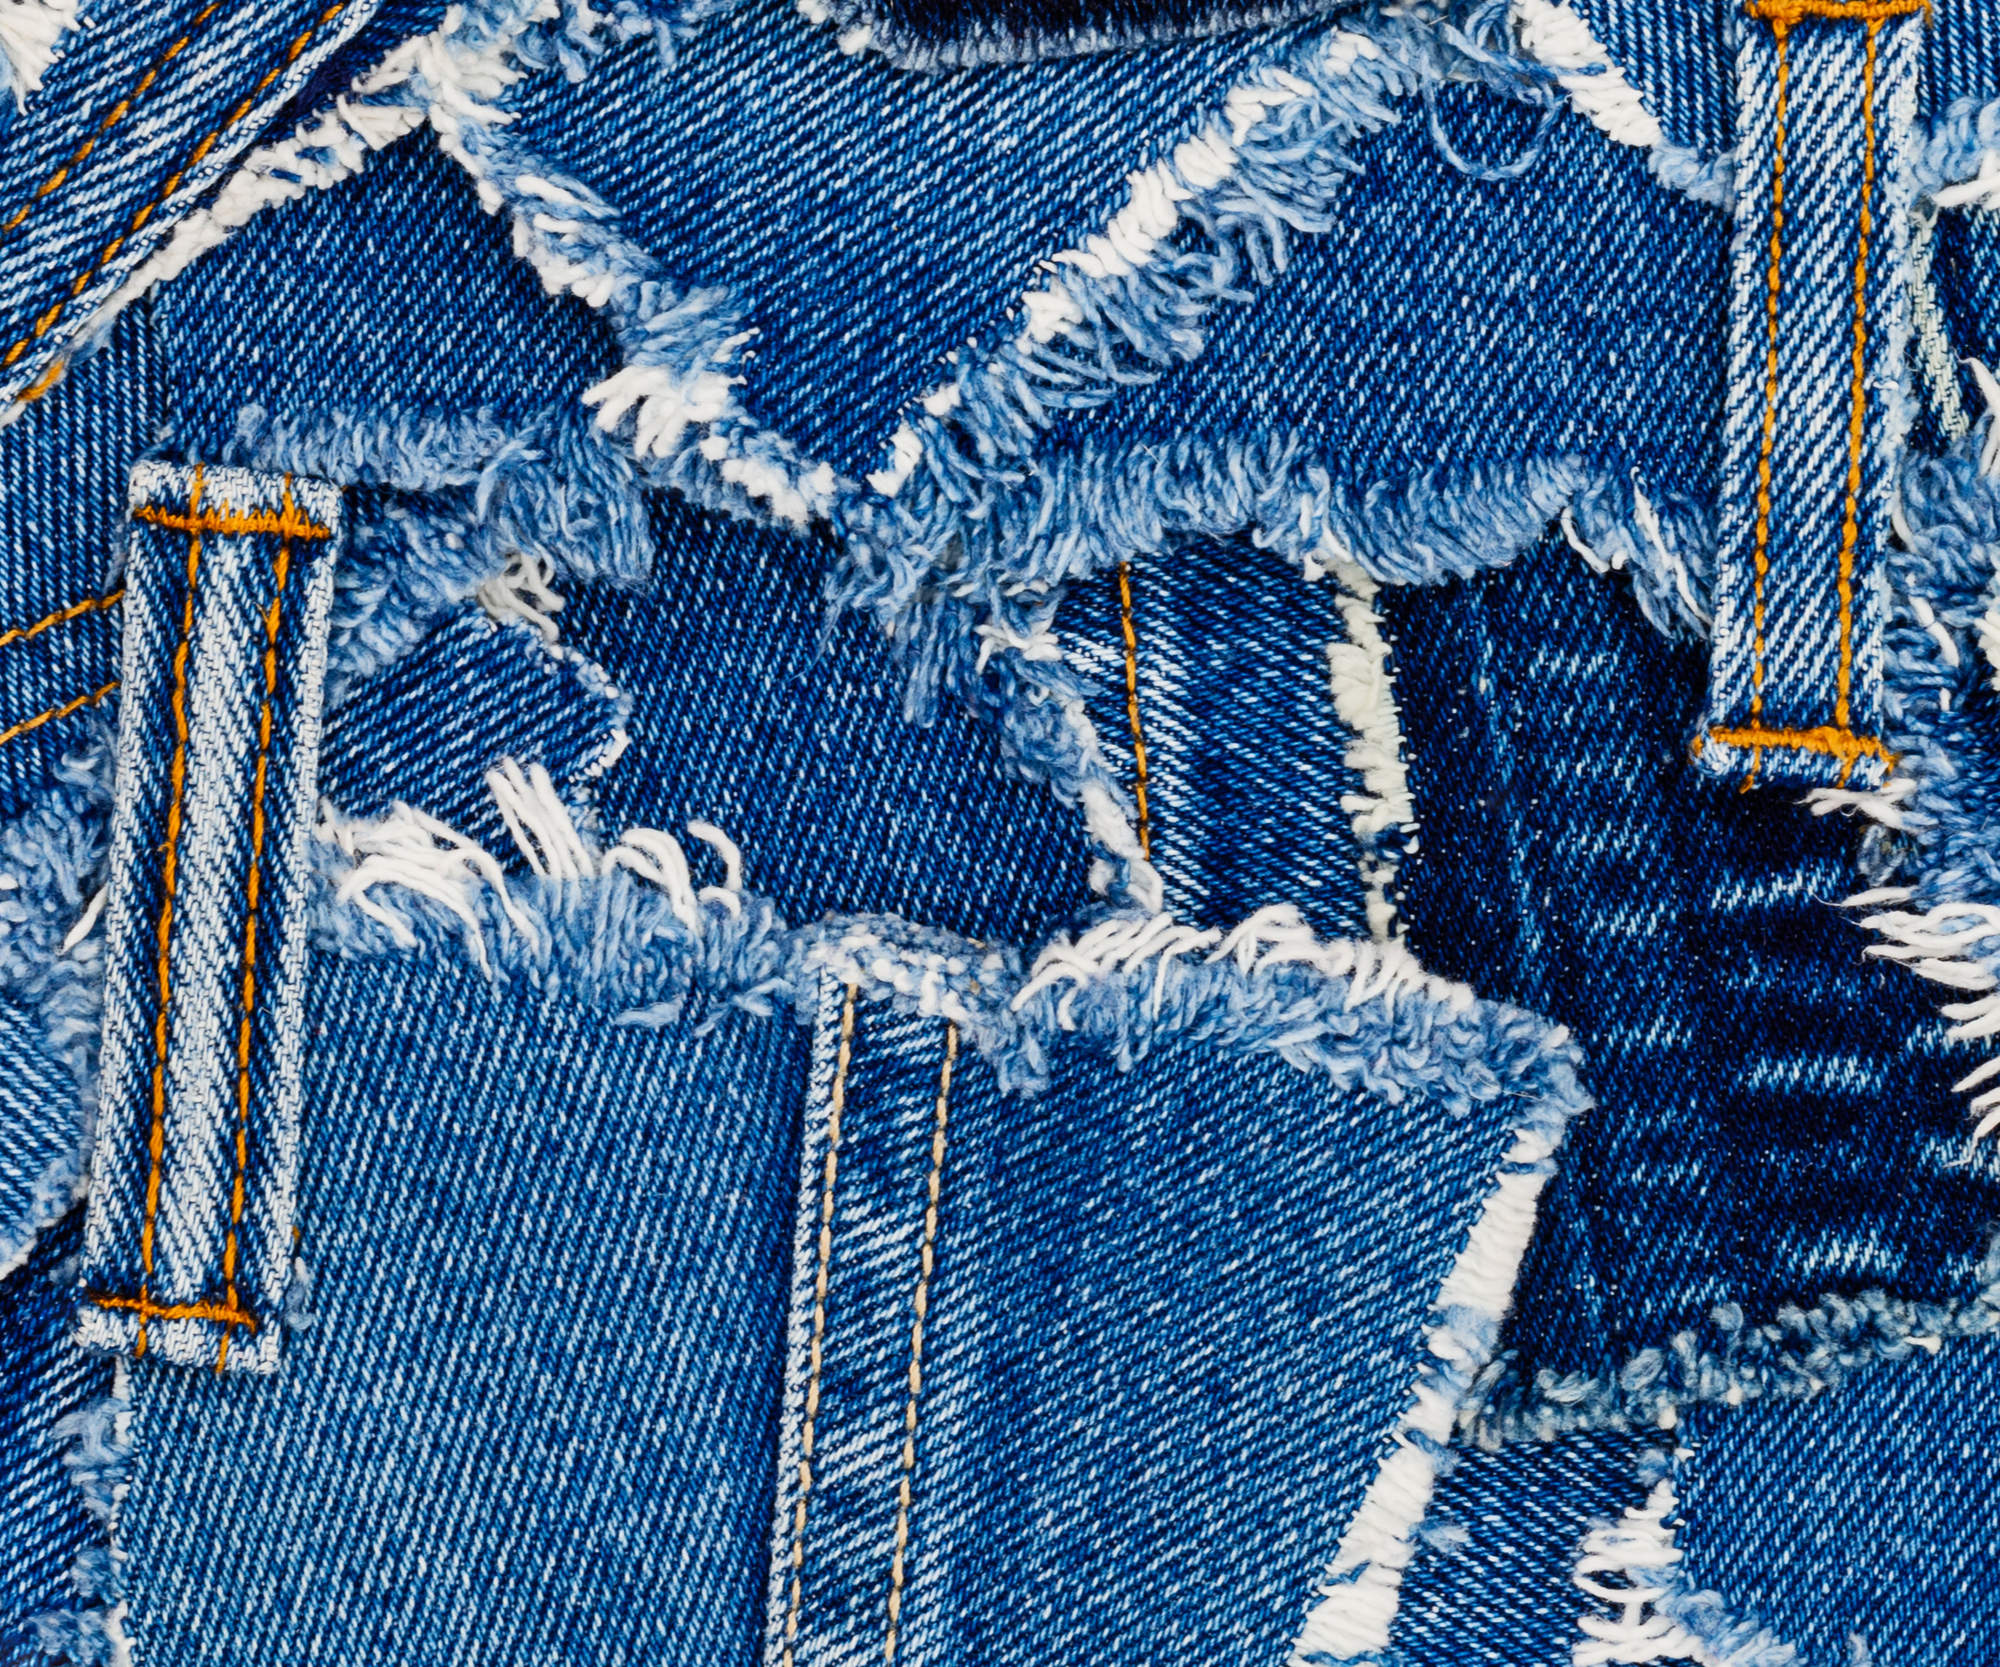 There's nothing worse than when your favorite pair of jeans rips. Here are some great sewing hacks for jeans to help your jeans last longer. 